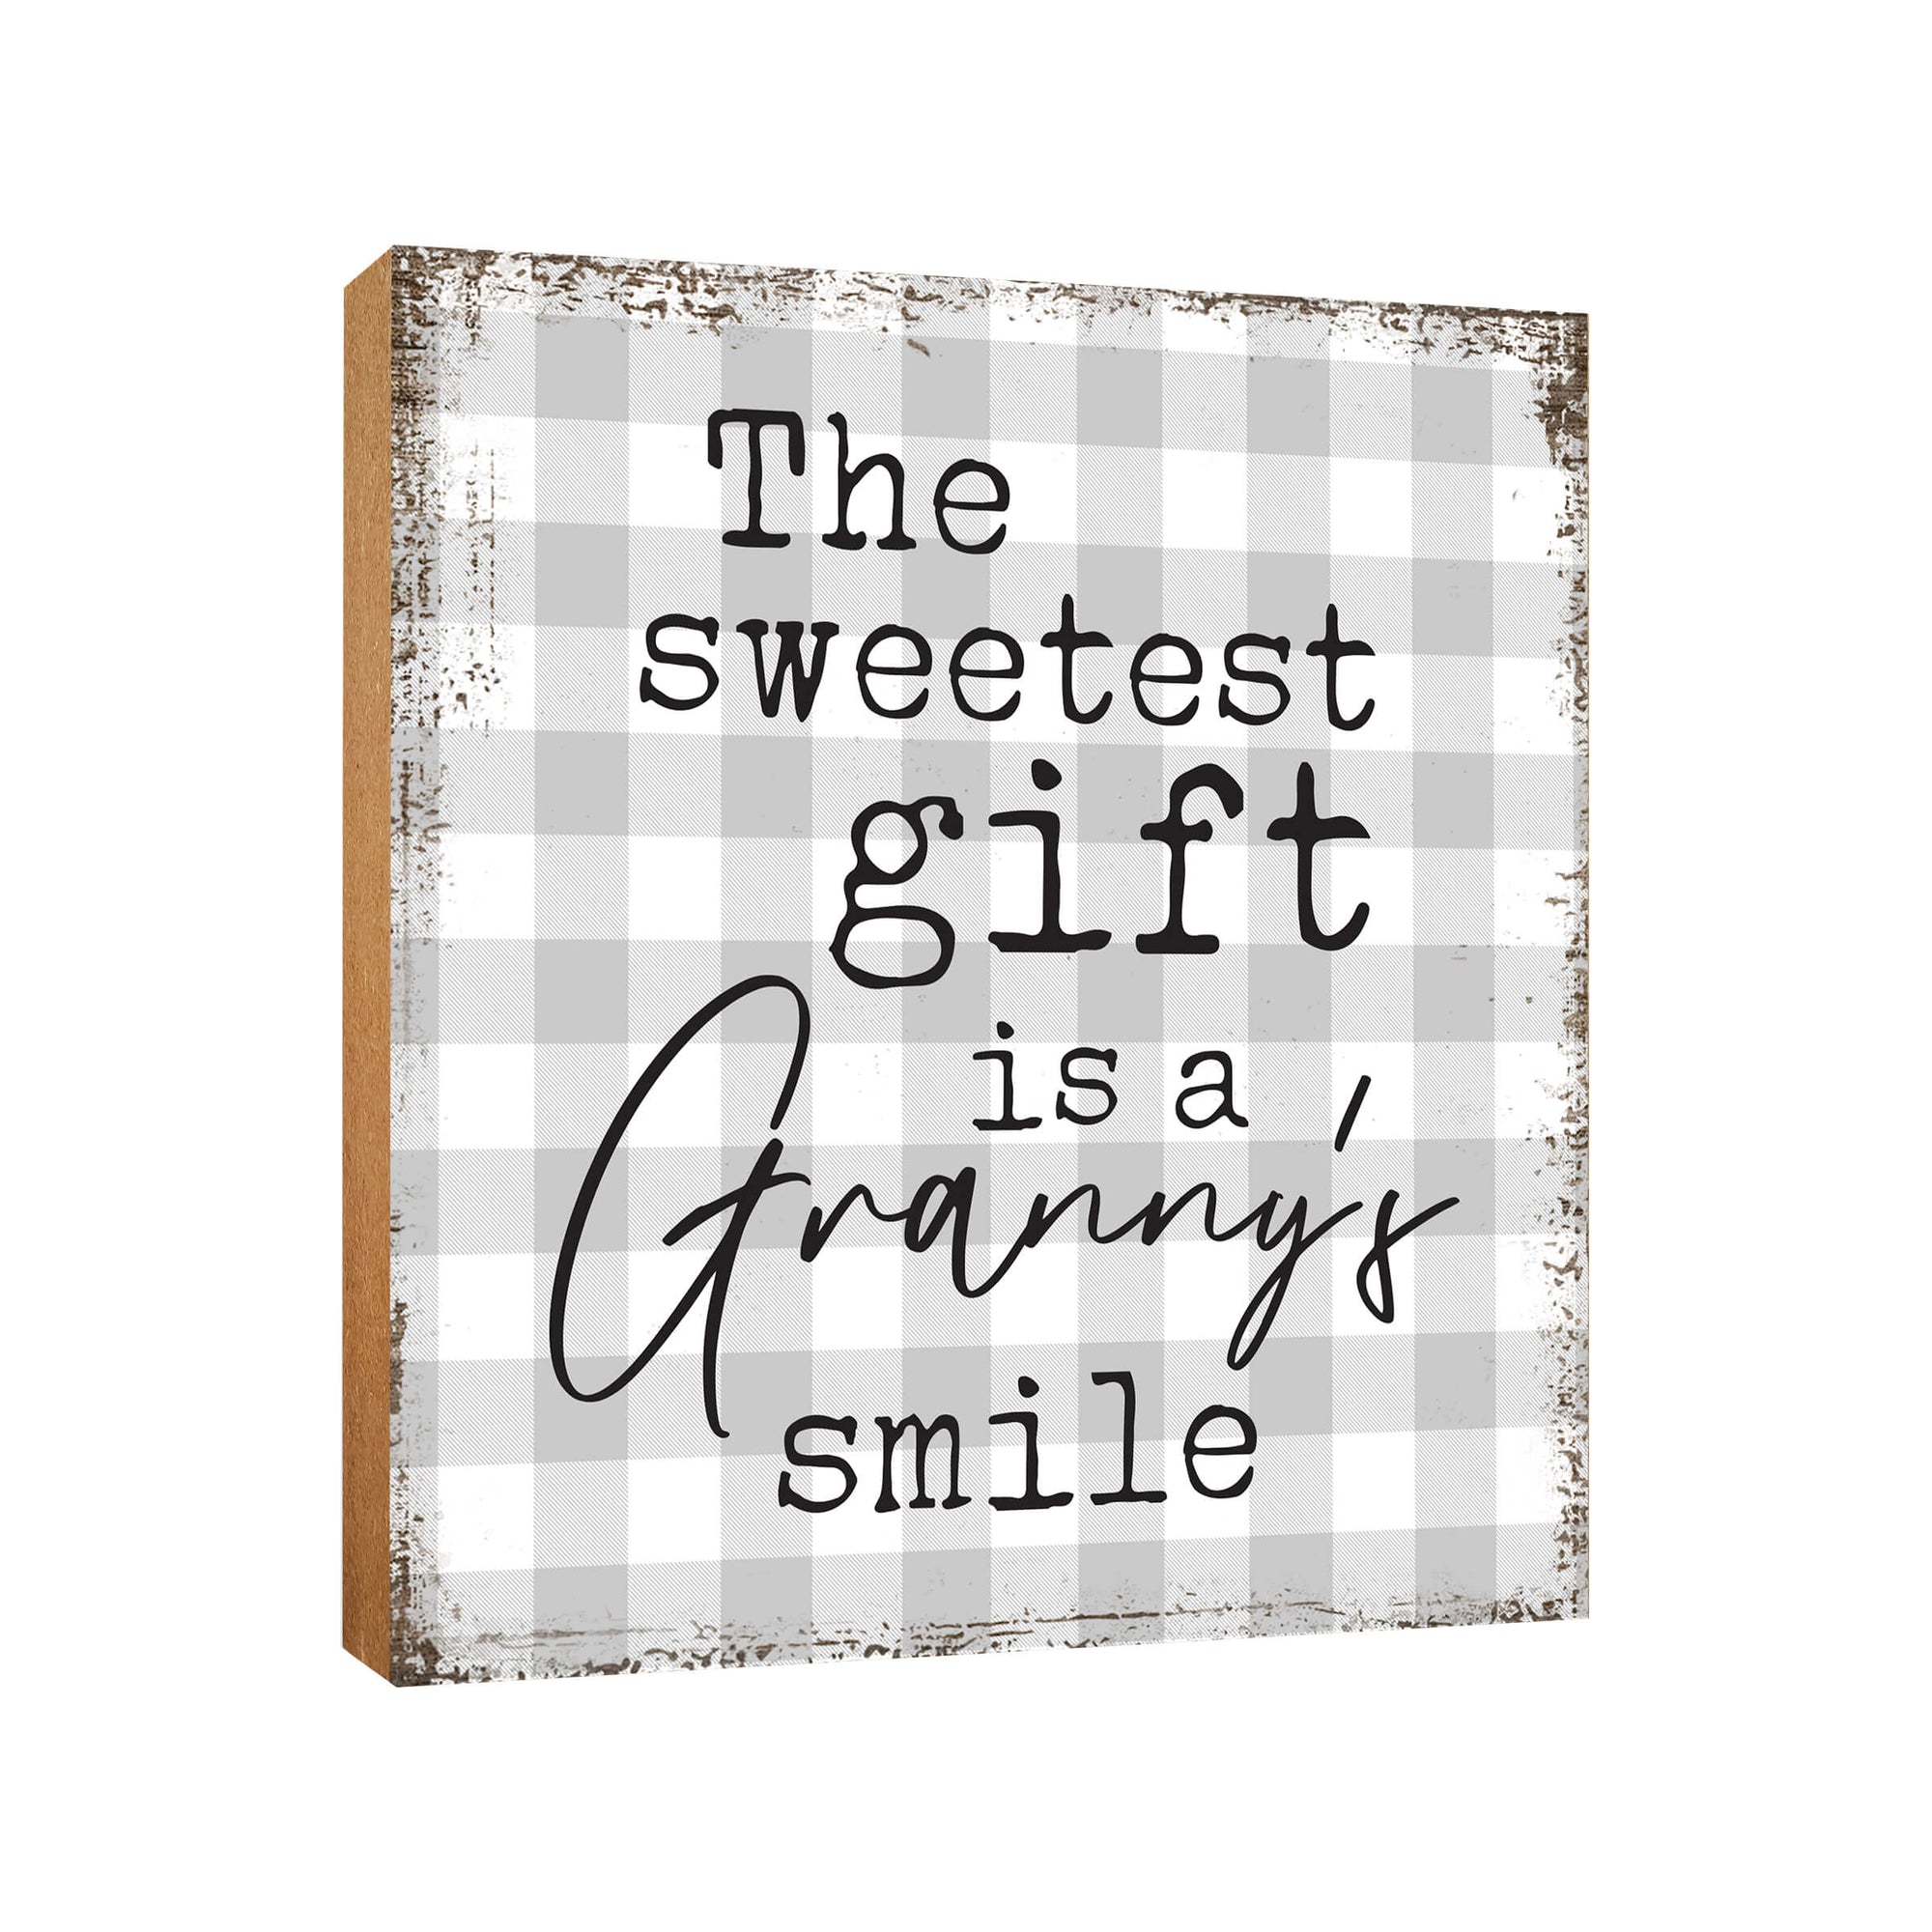 LifeSong Milestones Wooden Unique Shelf Decor and Table Top Signs for Grandmother